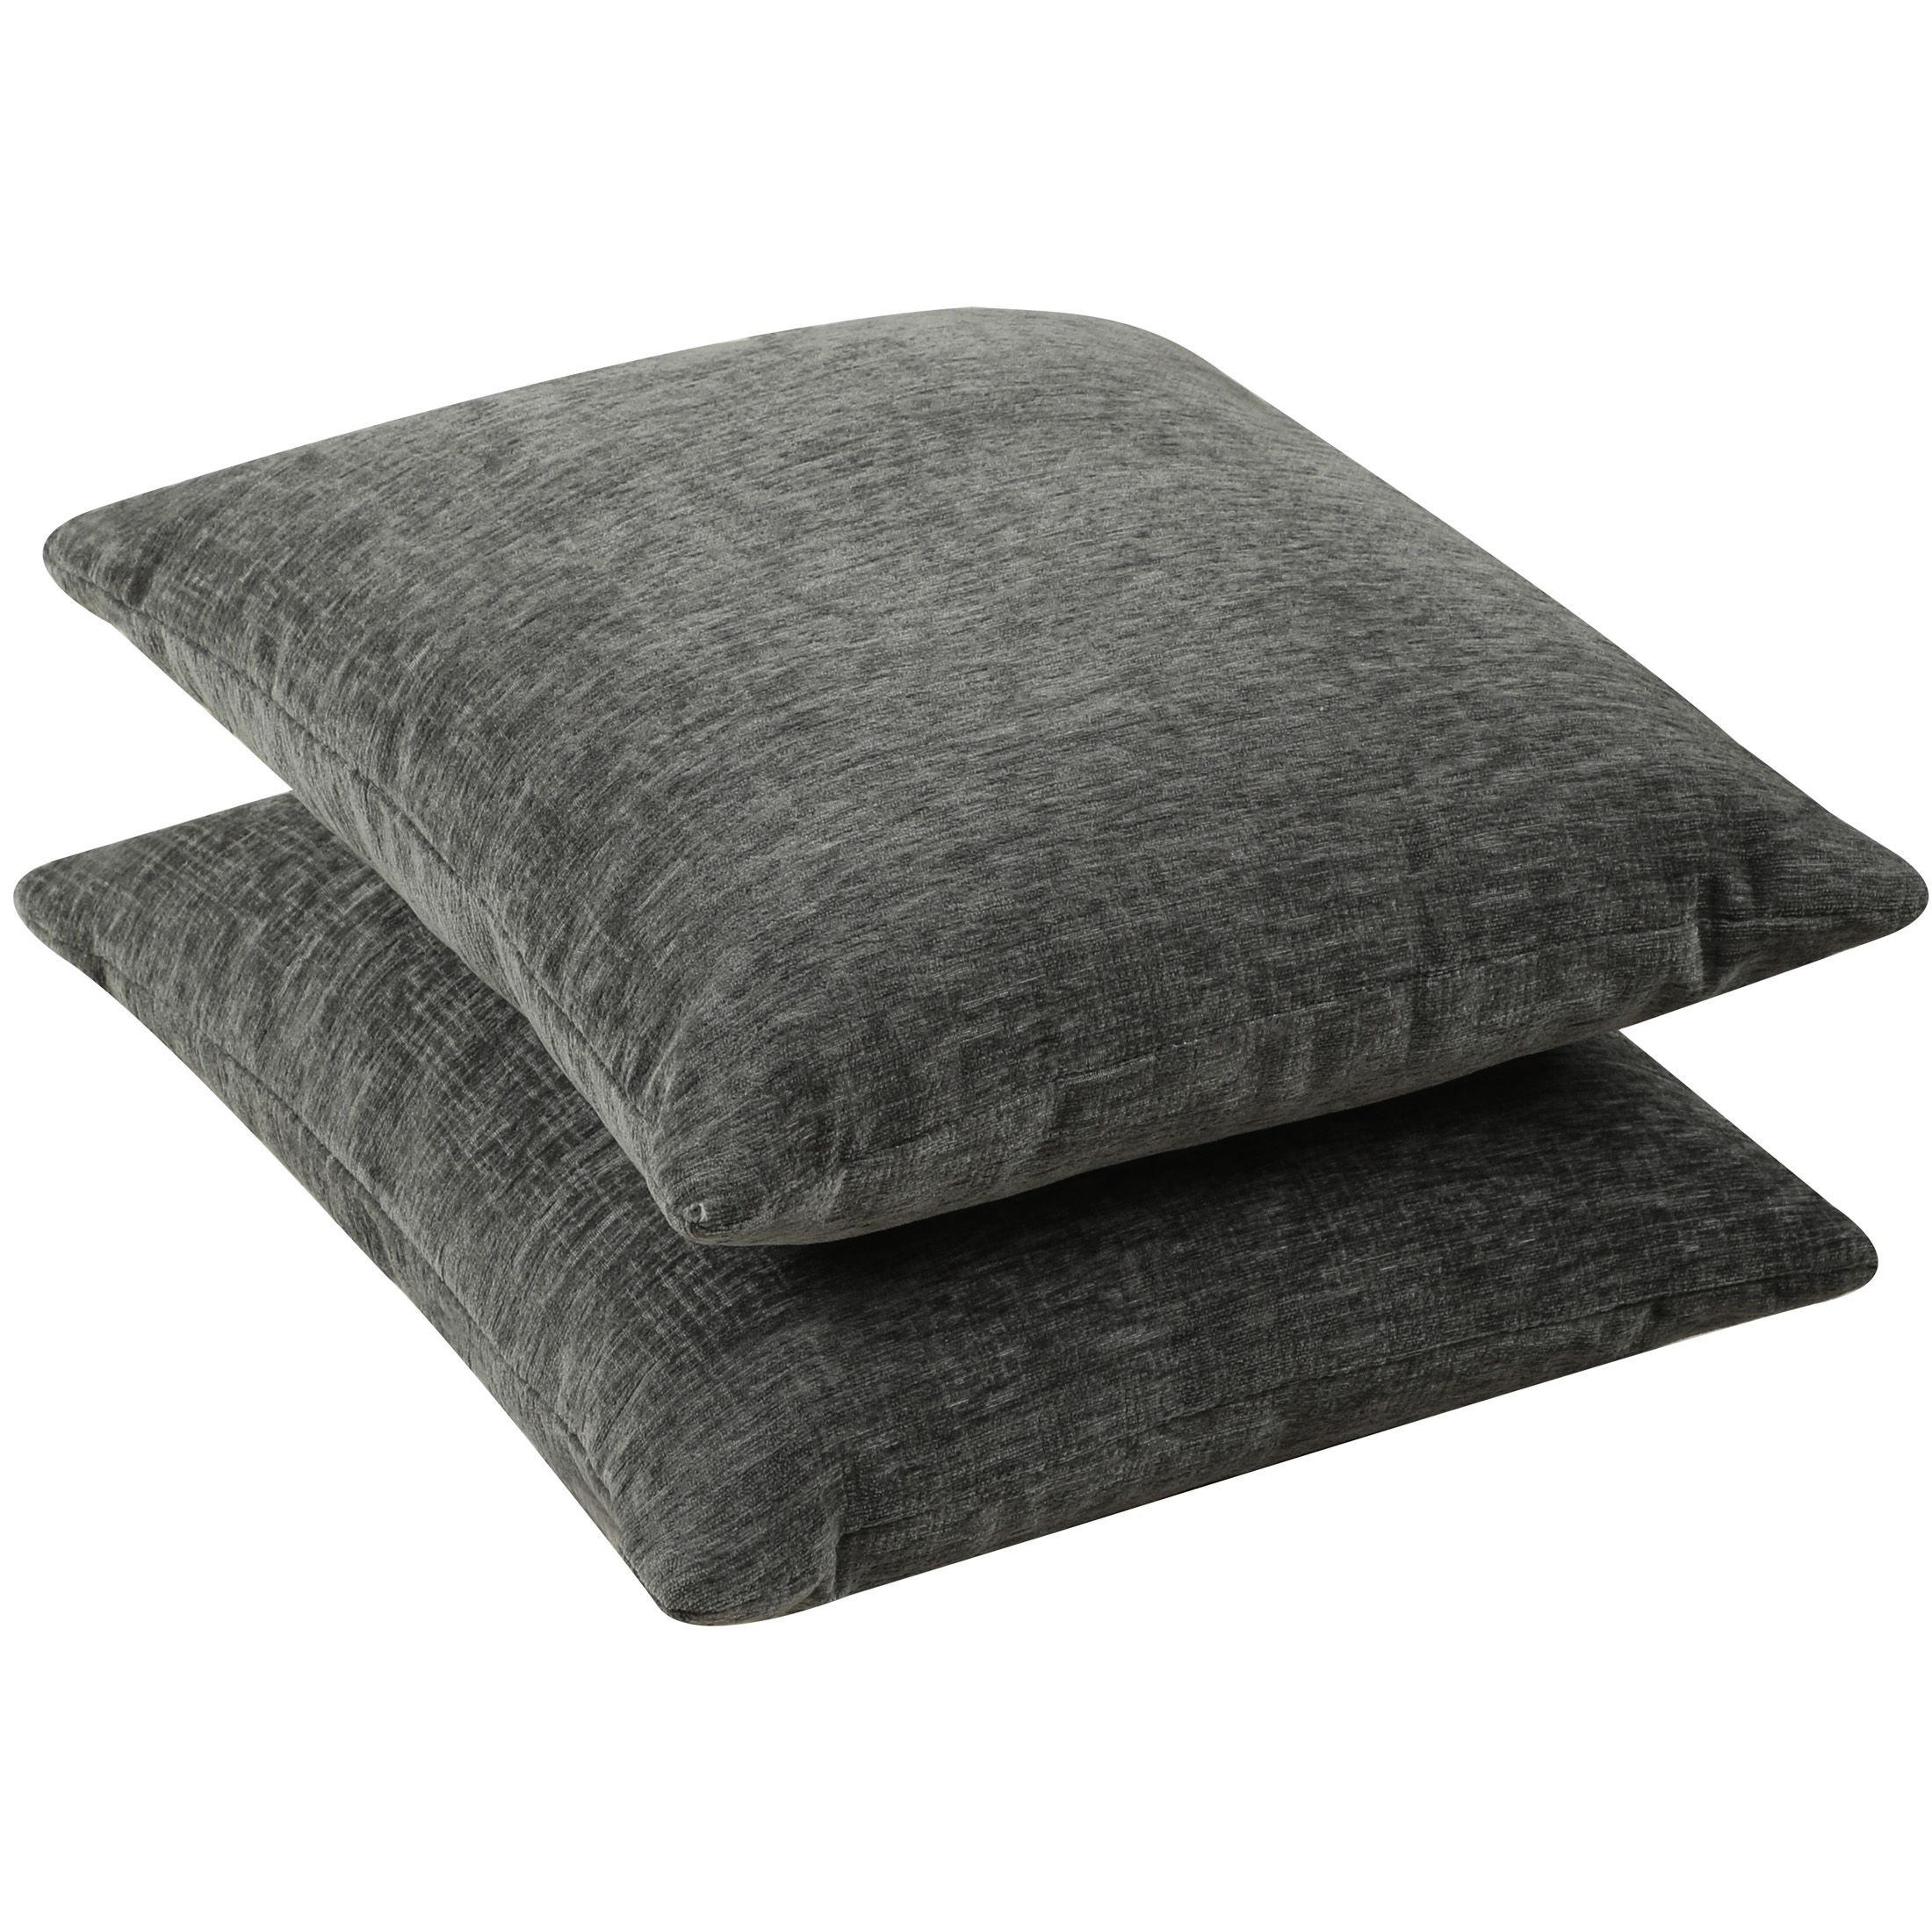 Mainstays Chenille Square Grey Pillow 18''x18'', 2 Pack - image 2 of 5